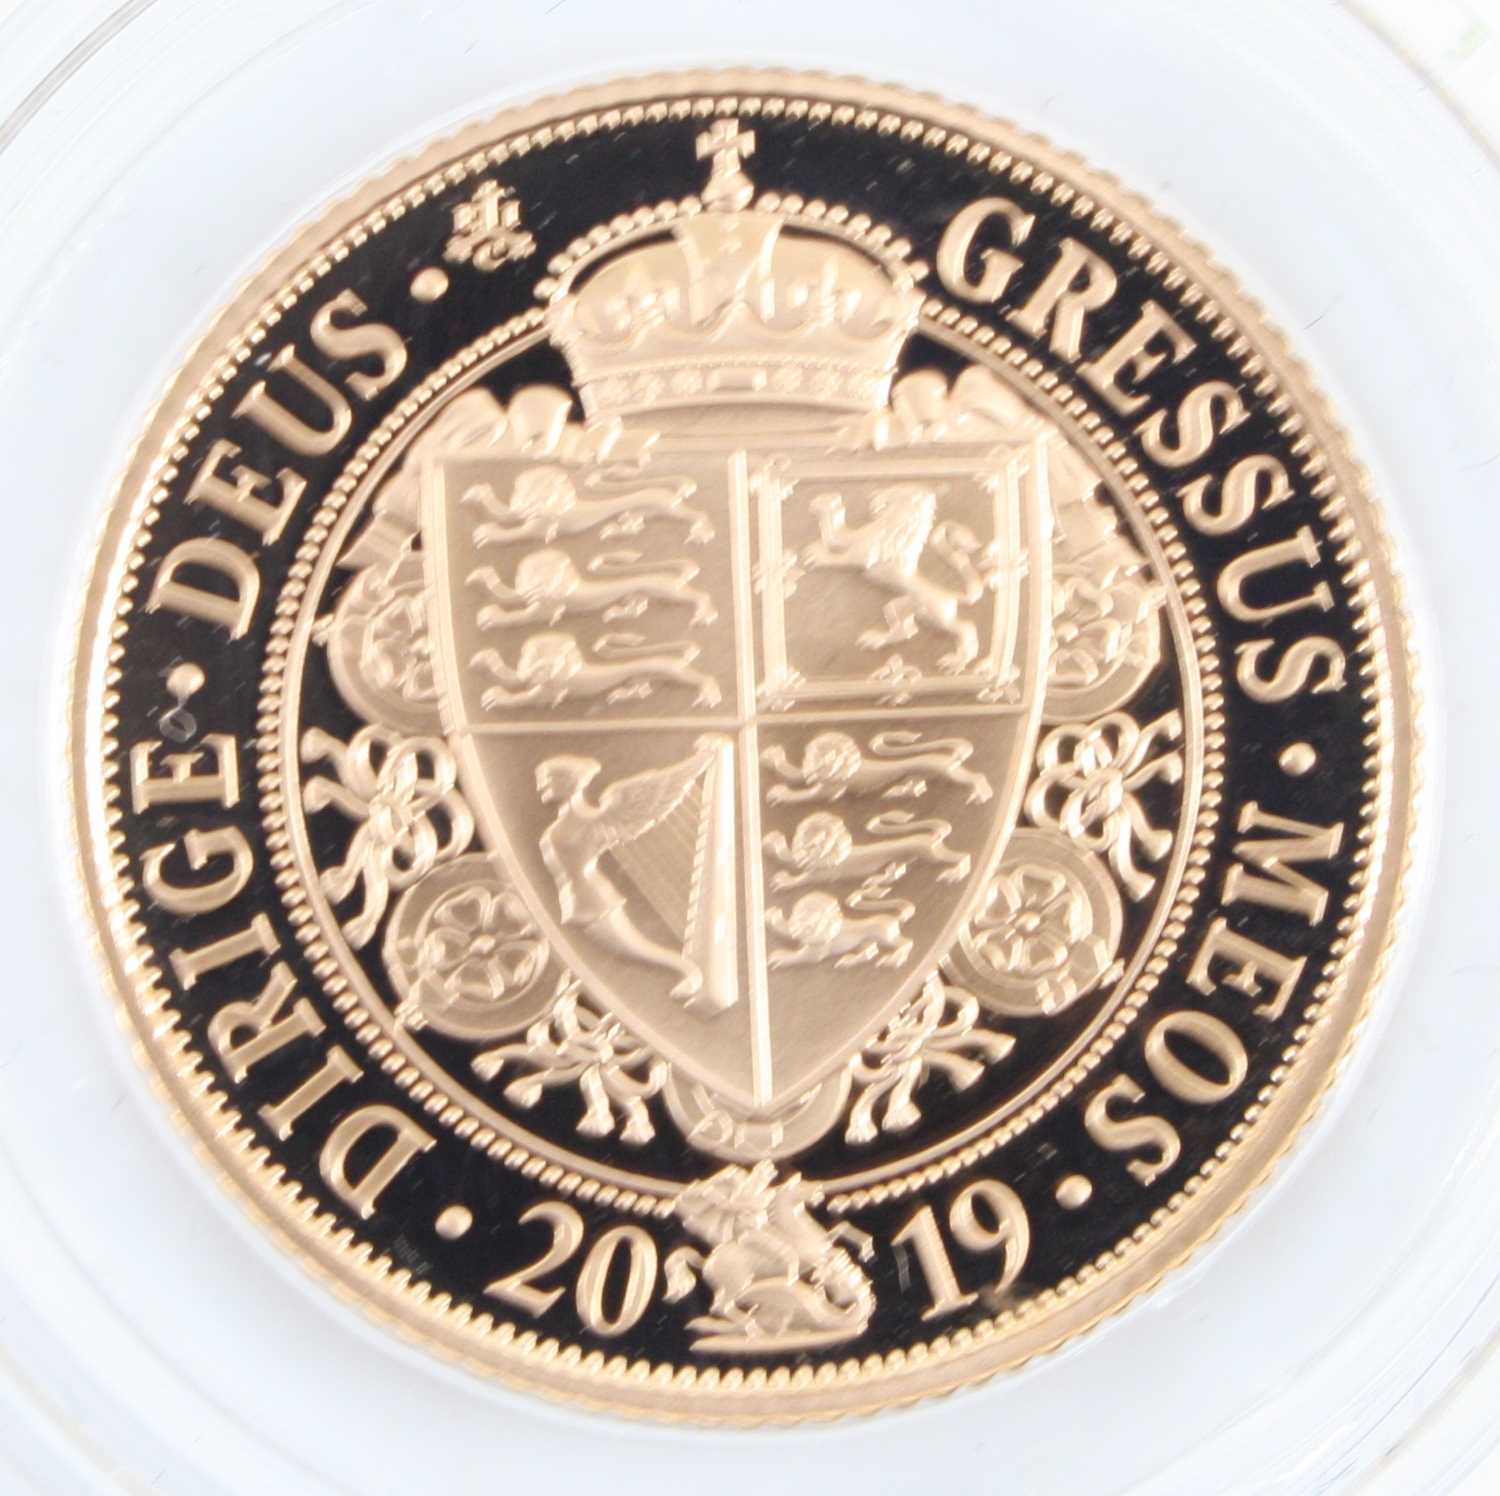 St Helena, East India Company, Queen Victoria 2019 Gold Proof Coin, obv: Elizabeth II, rev: - Image 3 of 3